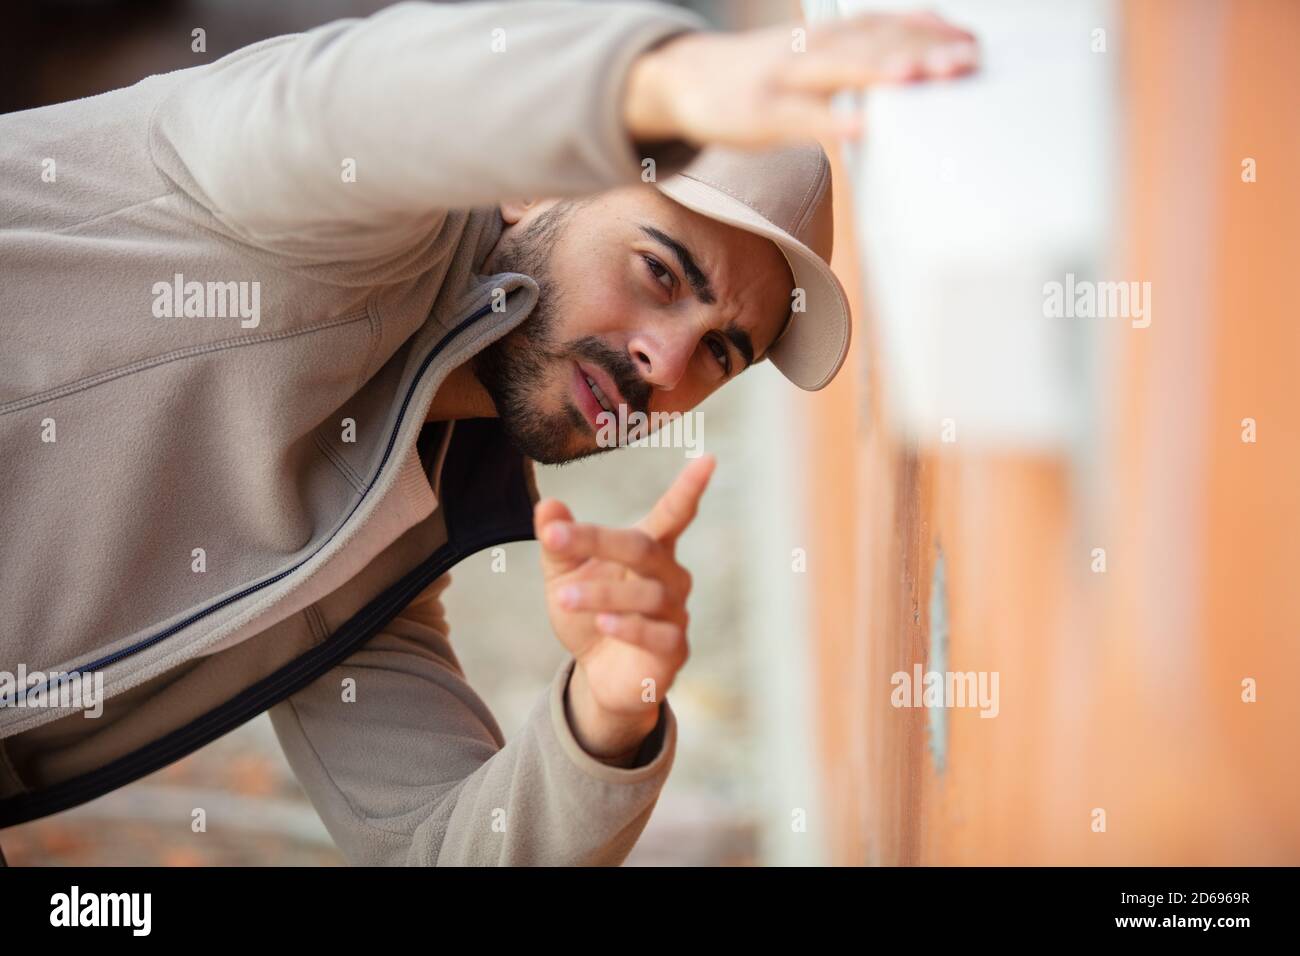 man worker in peaked cap checking window sill Stock Photo